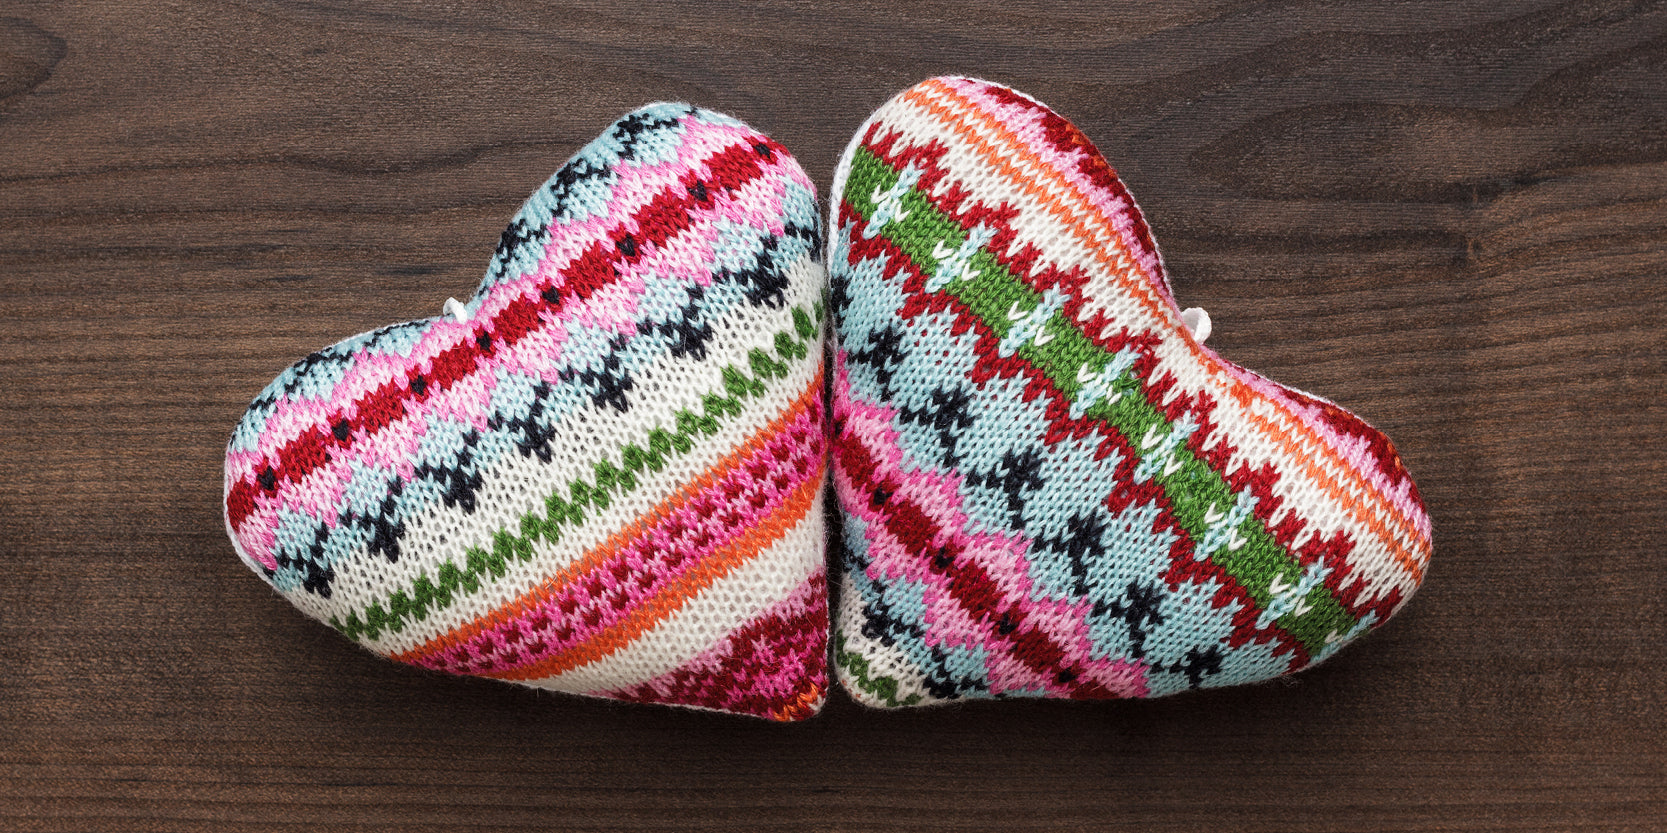 REUSE: Repurpose Old Sweaters and Jumpers - Gift Wrapping - Knitted Hearts